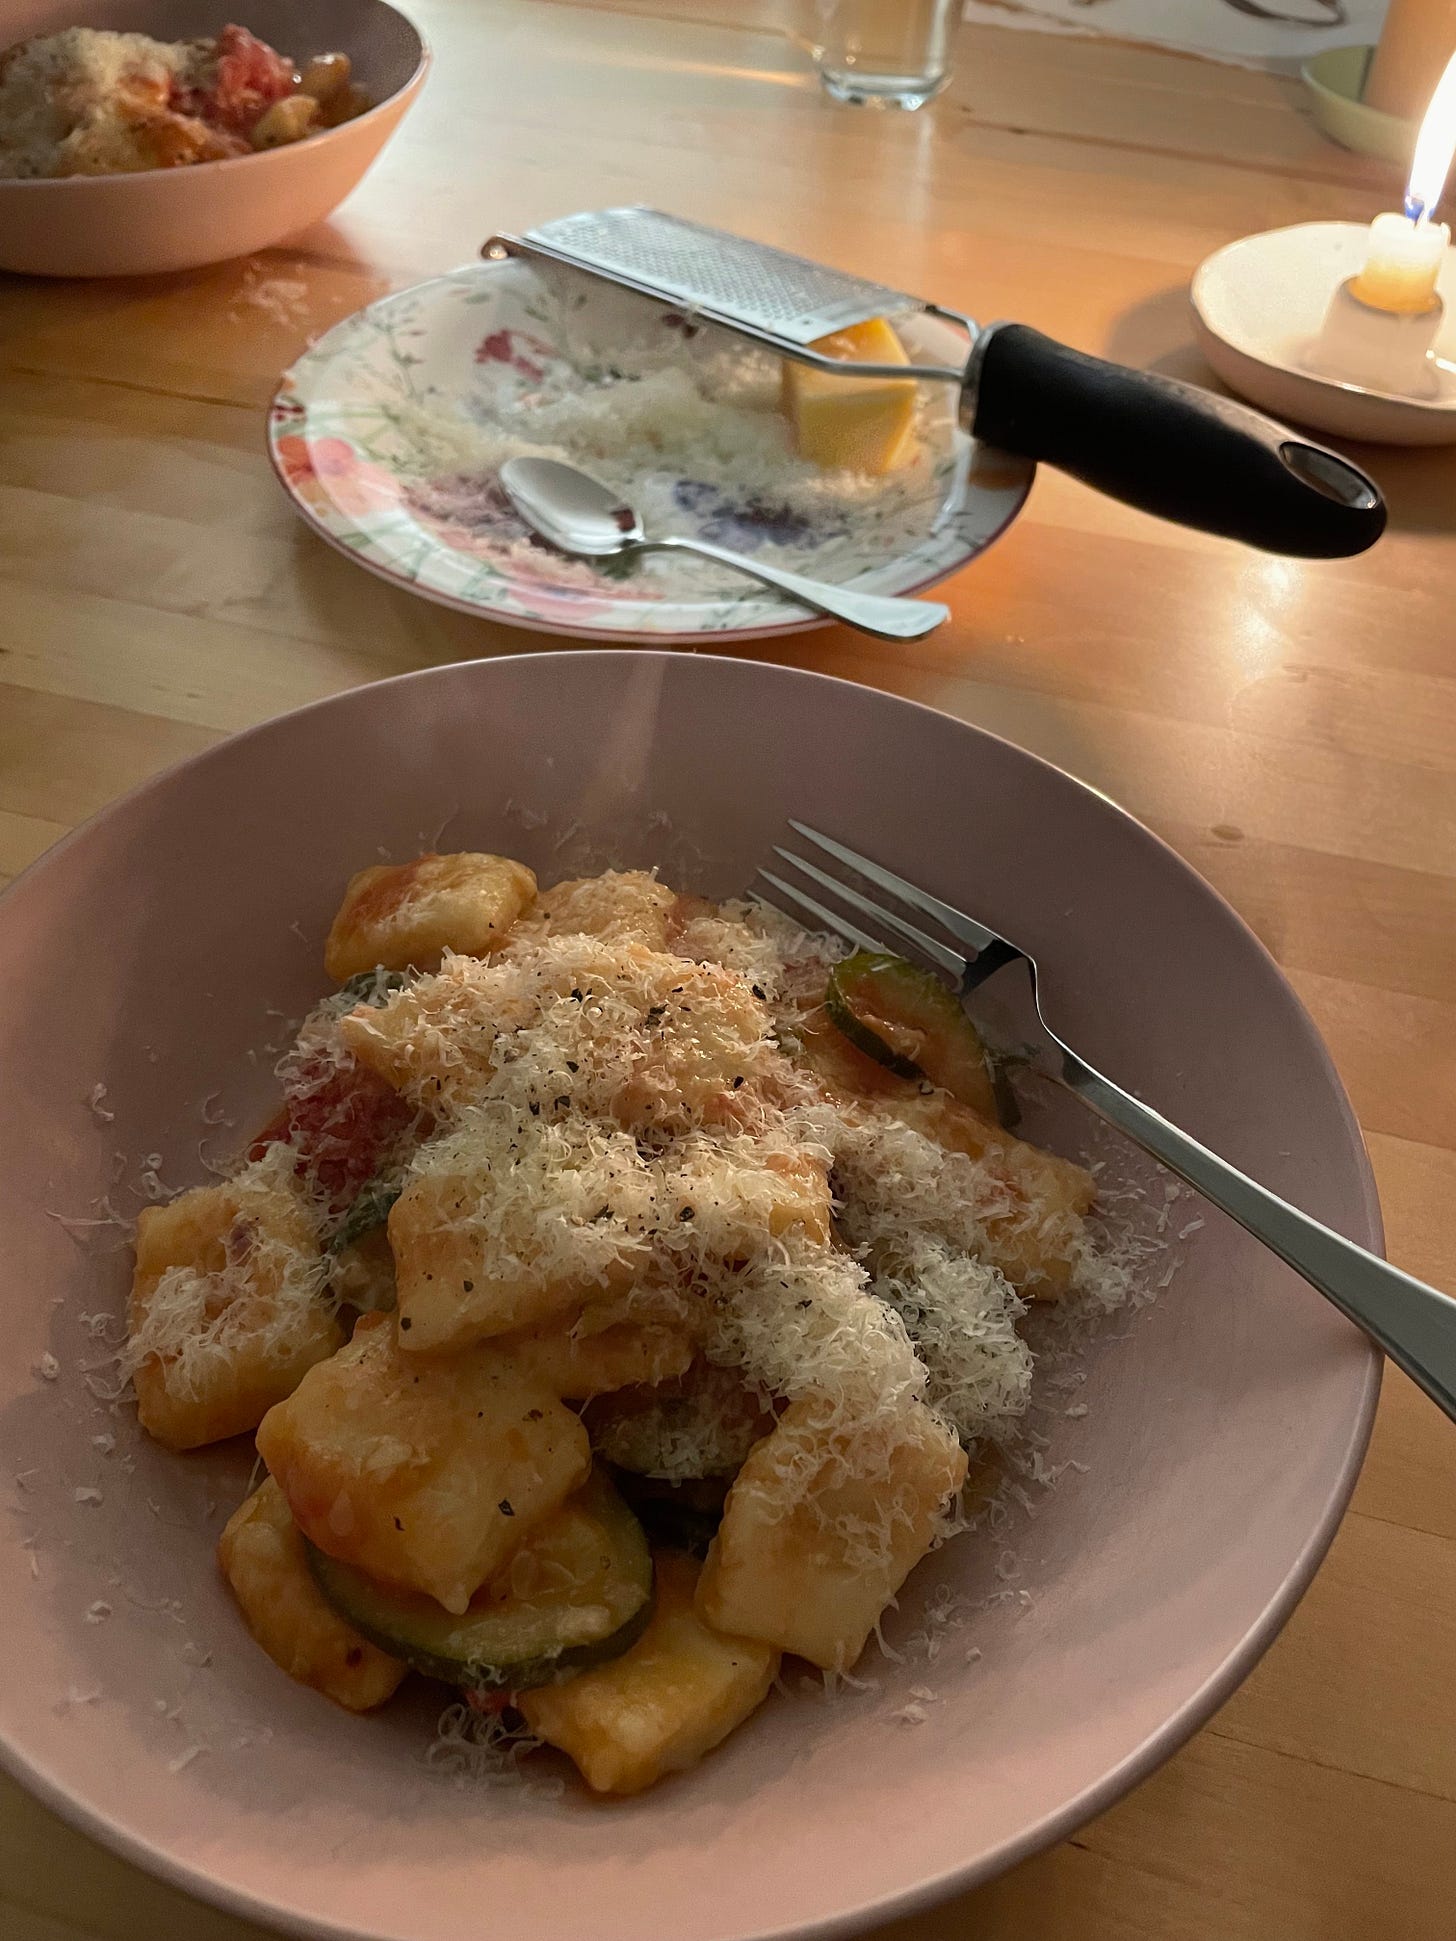 Bowl of potato gnocchi topped with parmesan cheese. It's in a tomato and zucchini sauce. Extra cheese on a plate in the background with a microplane.